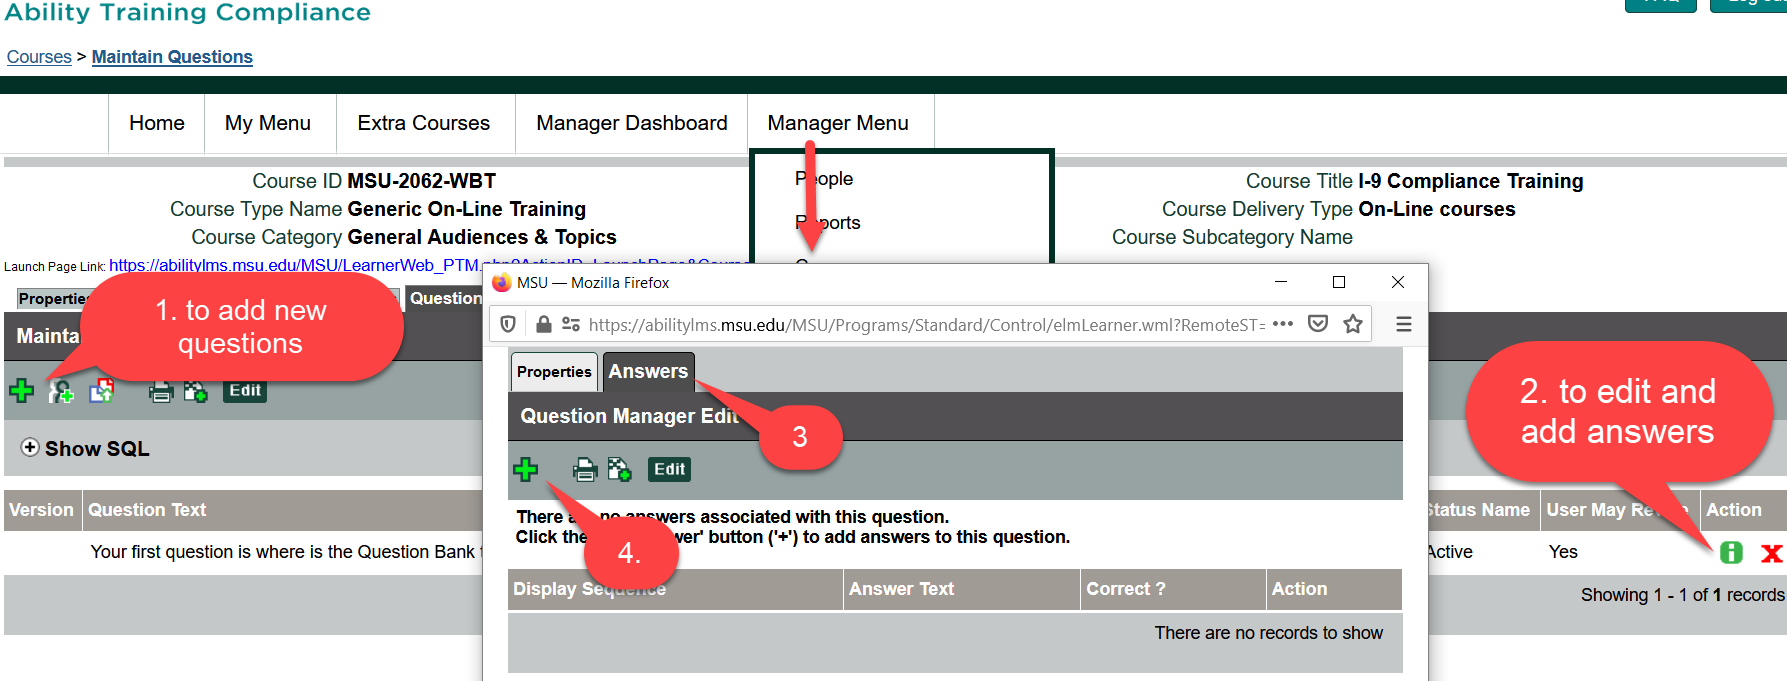 Screenshot showing assessment questions in Ability LMS